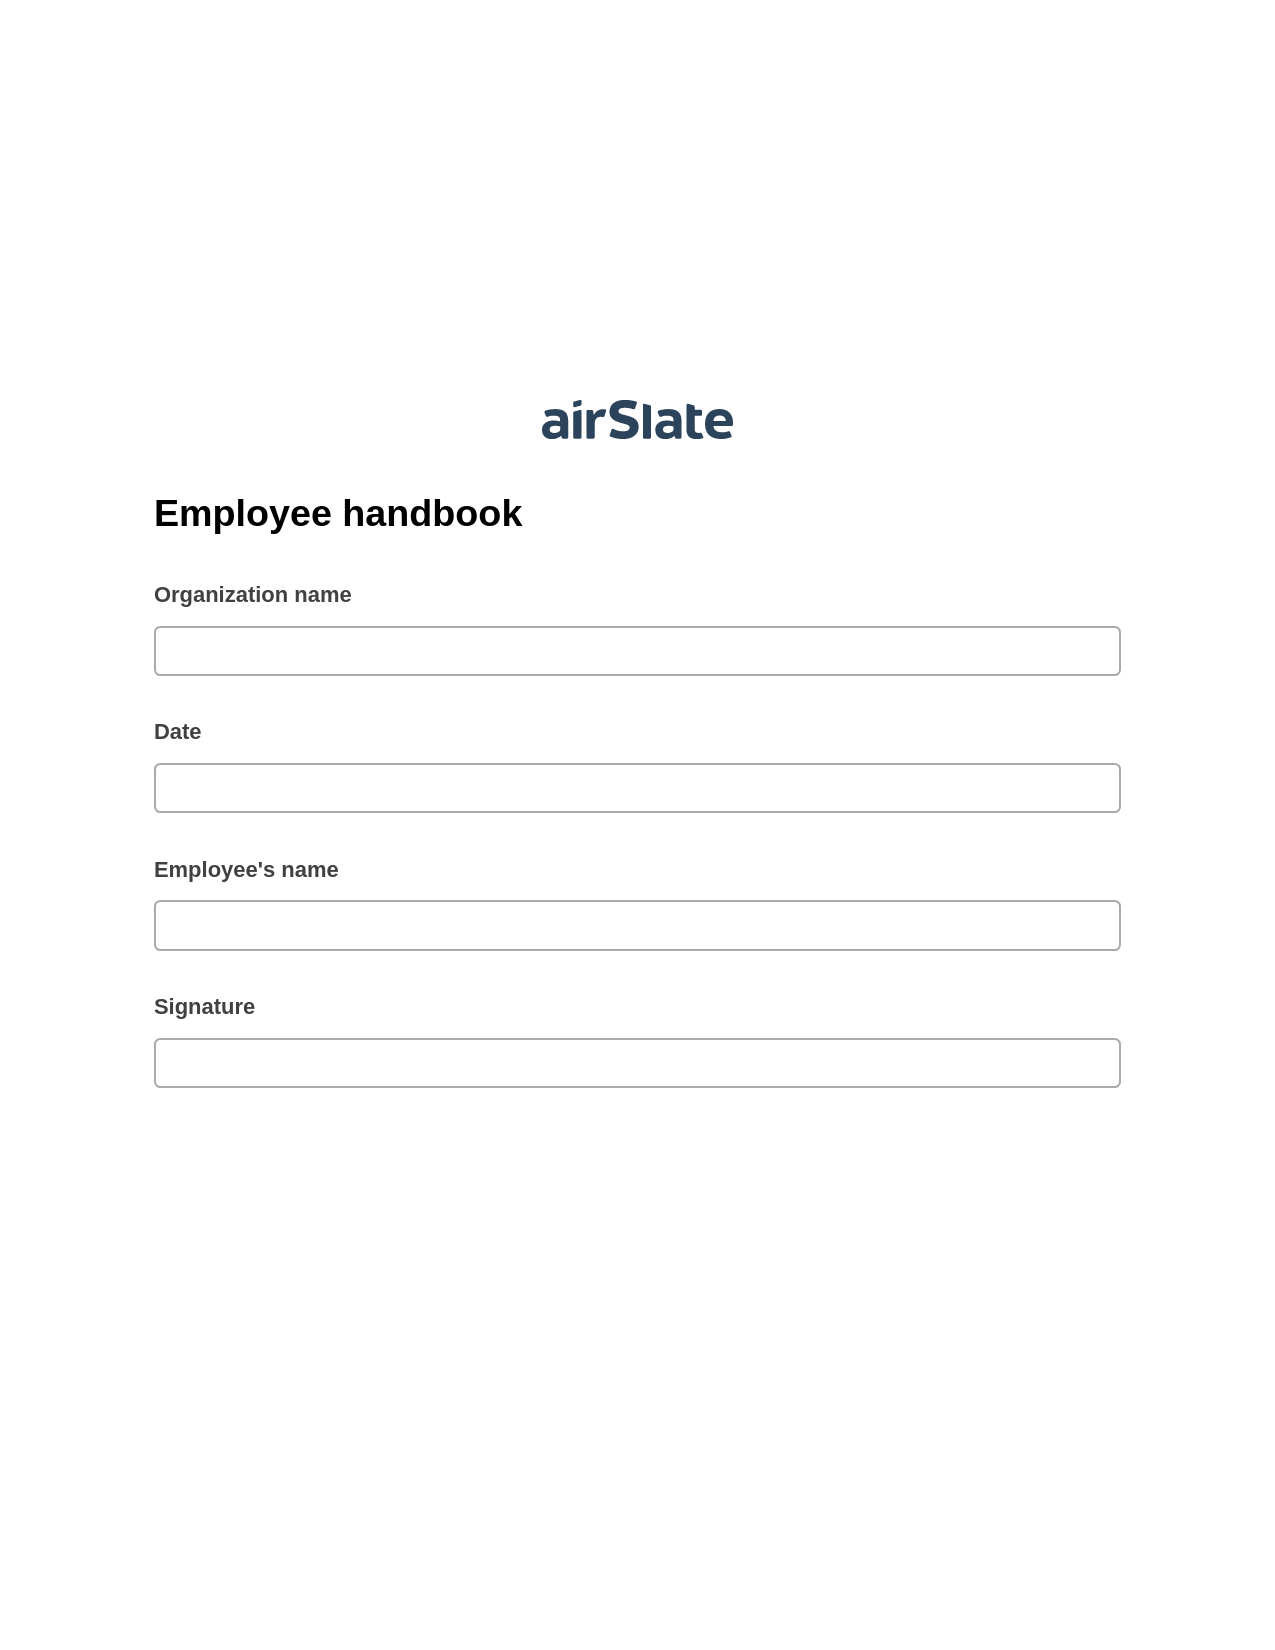 Employee handbook Pre-fill from Office 365 Excel Bot, Create slate bot, Export to Excel 365 Bot